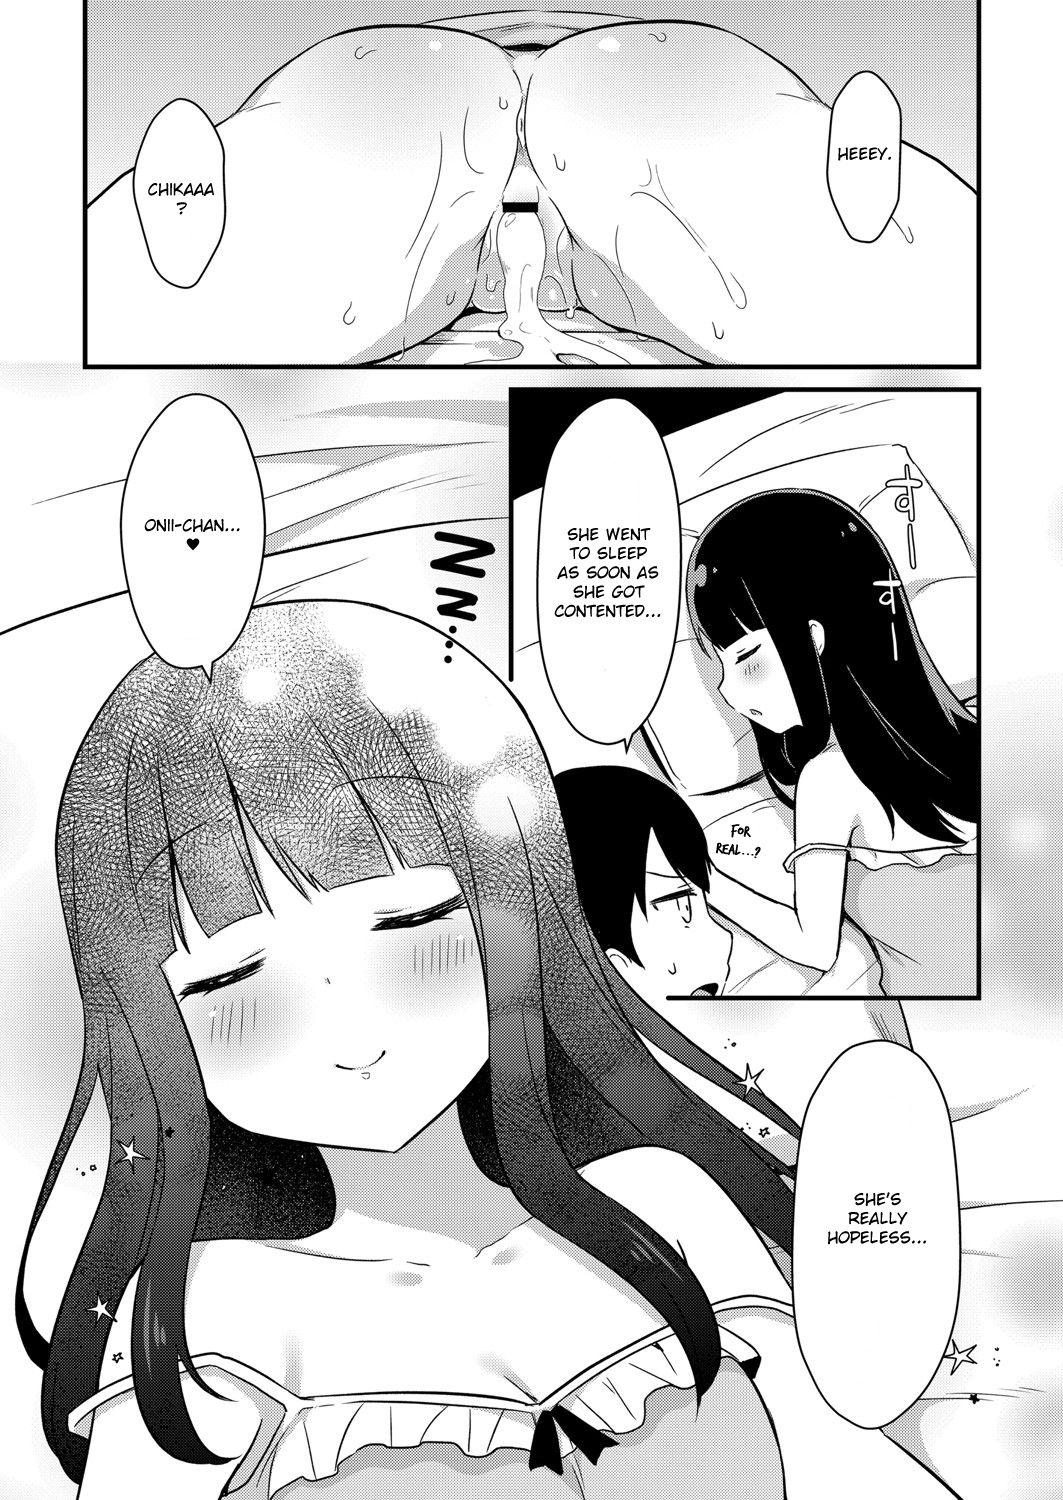 Orgasms [Tiger] Yuuwaku・Imouto #2 Onii-chan wa seishori gakari | Little Sister Temptation #2 Onii-chan is in Charge of My Libido Management (COMIC Reboot Vol. 07) [English] [Digital] Thylinh - Page 20